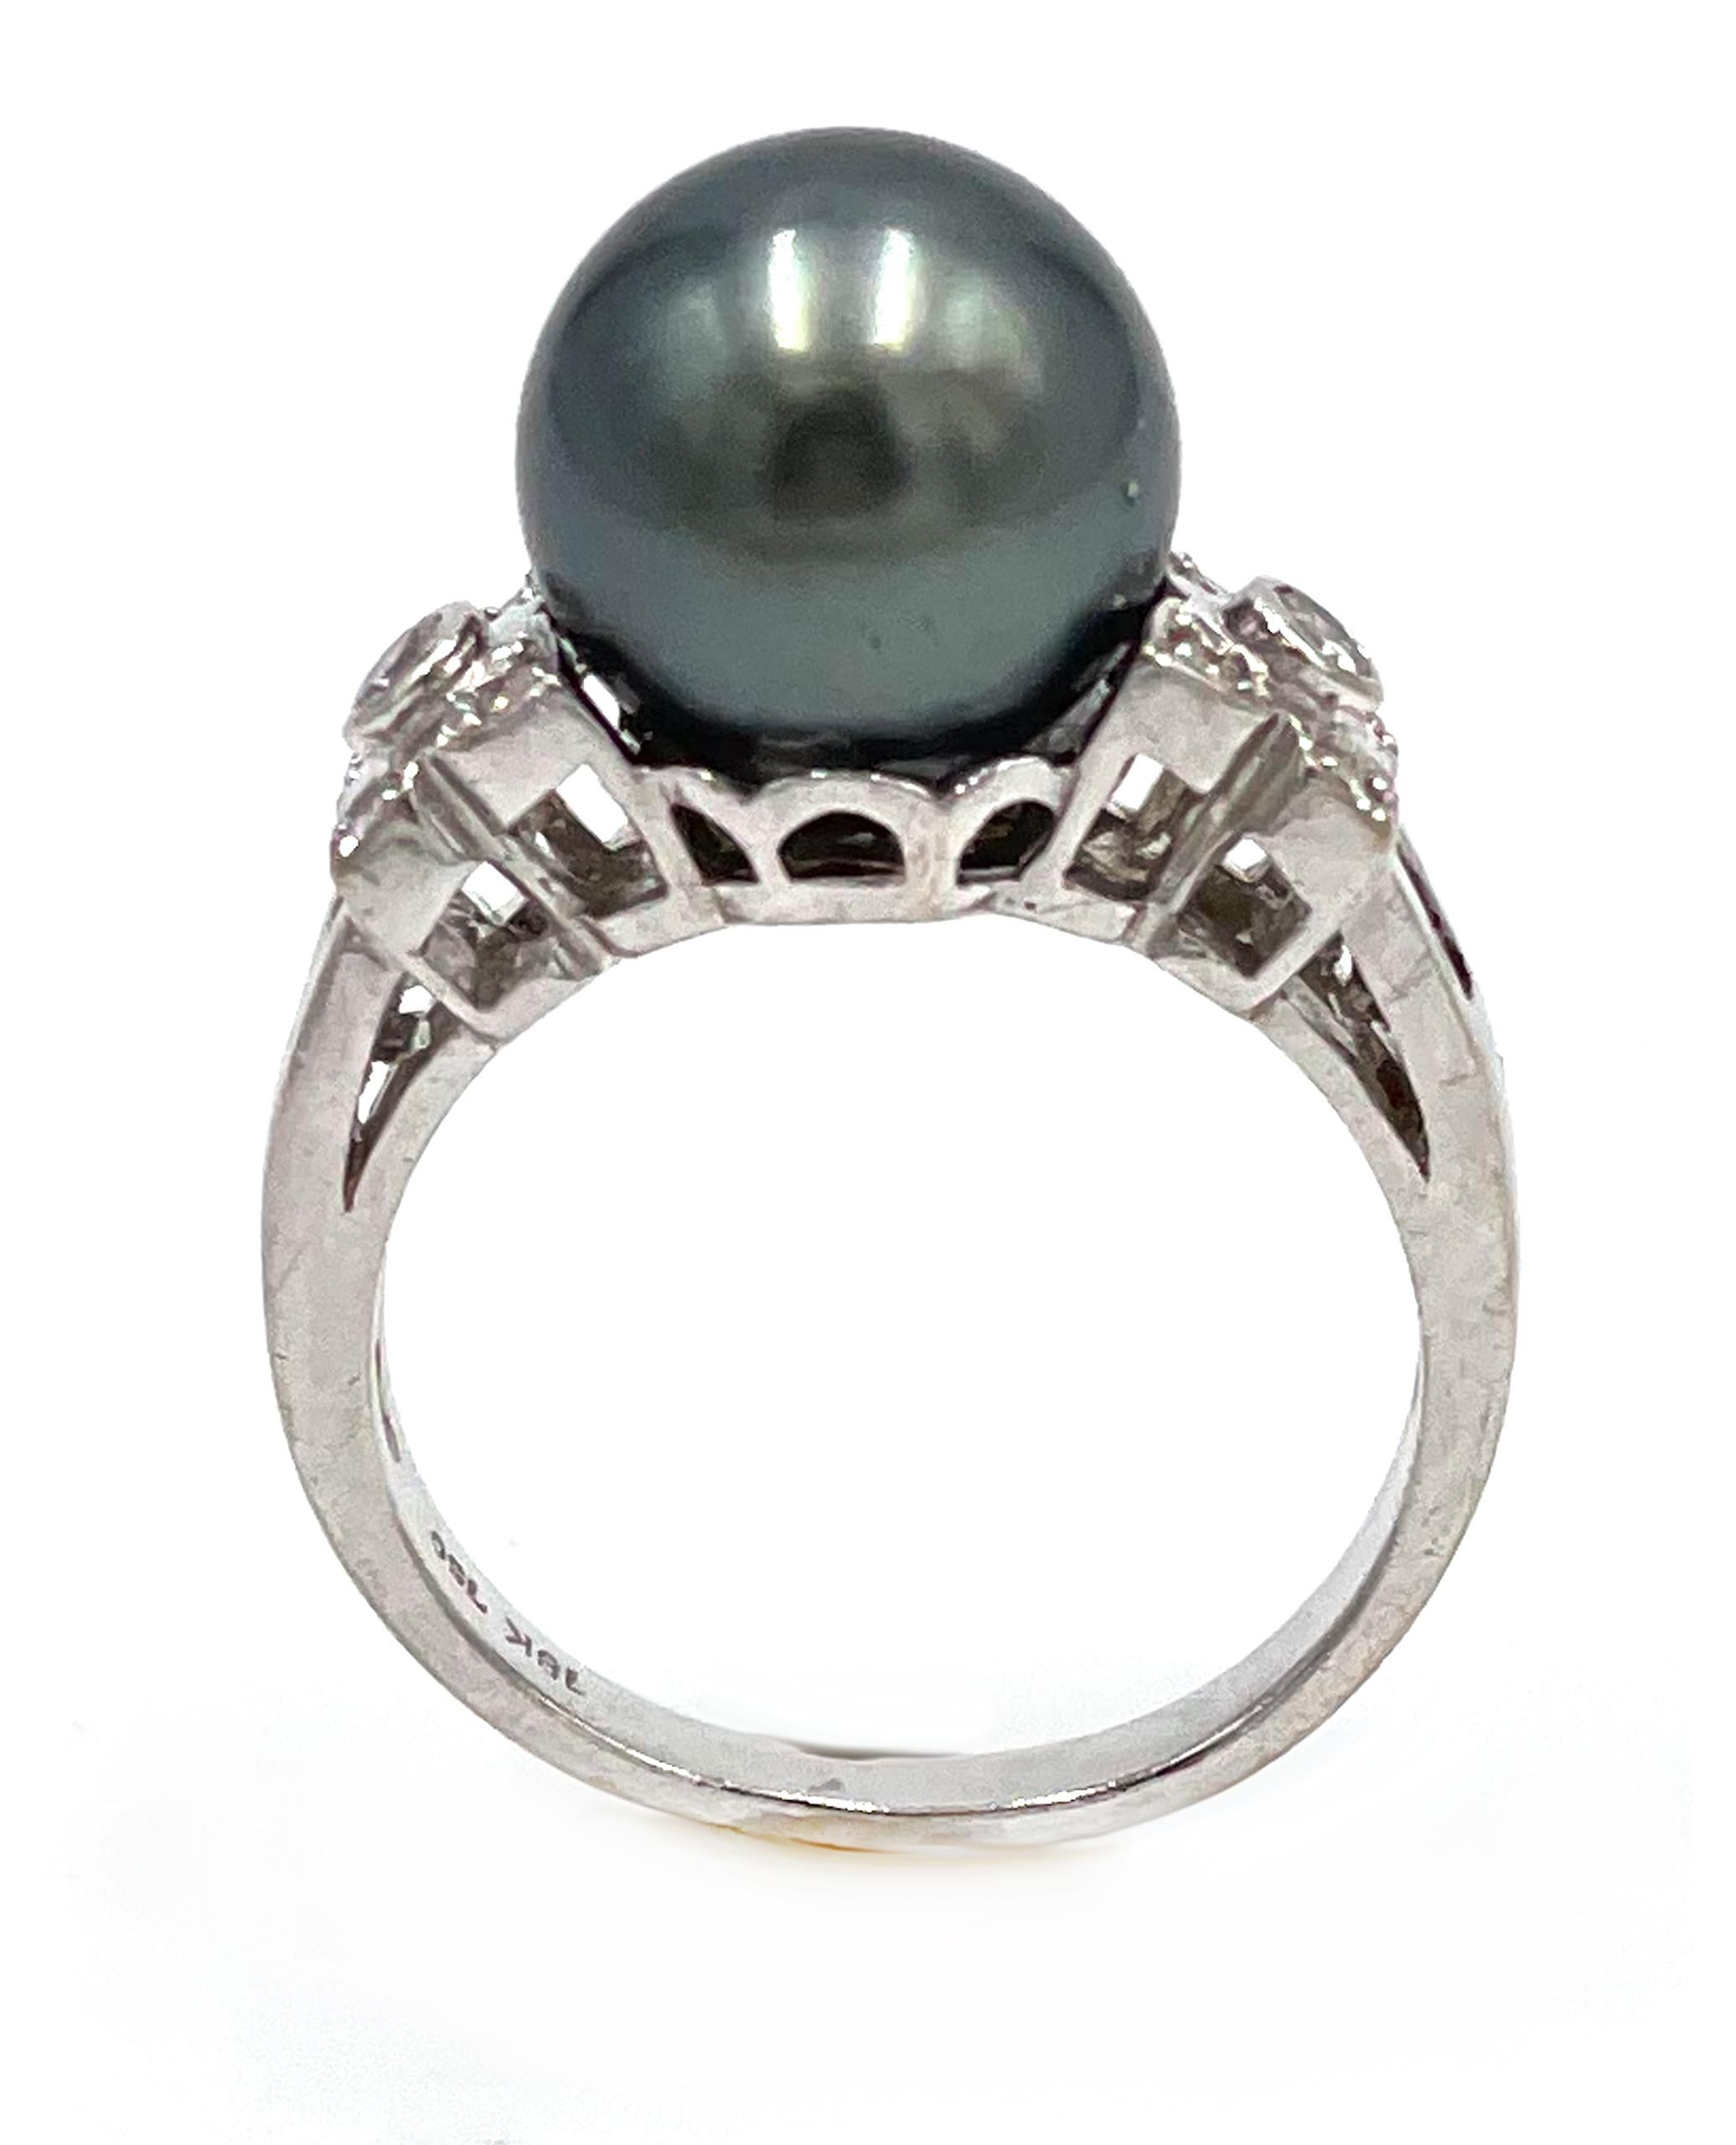 Pre owned 18K white gold Tahitian South Sea pearl ring with 10 round faceted diamonds and 6 baguette diamonds weighing approximately 0.25 carats total.


* Finger size 6
* Diamonds are on average H/I/ color, SI clarity.

